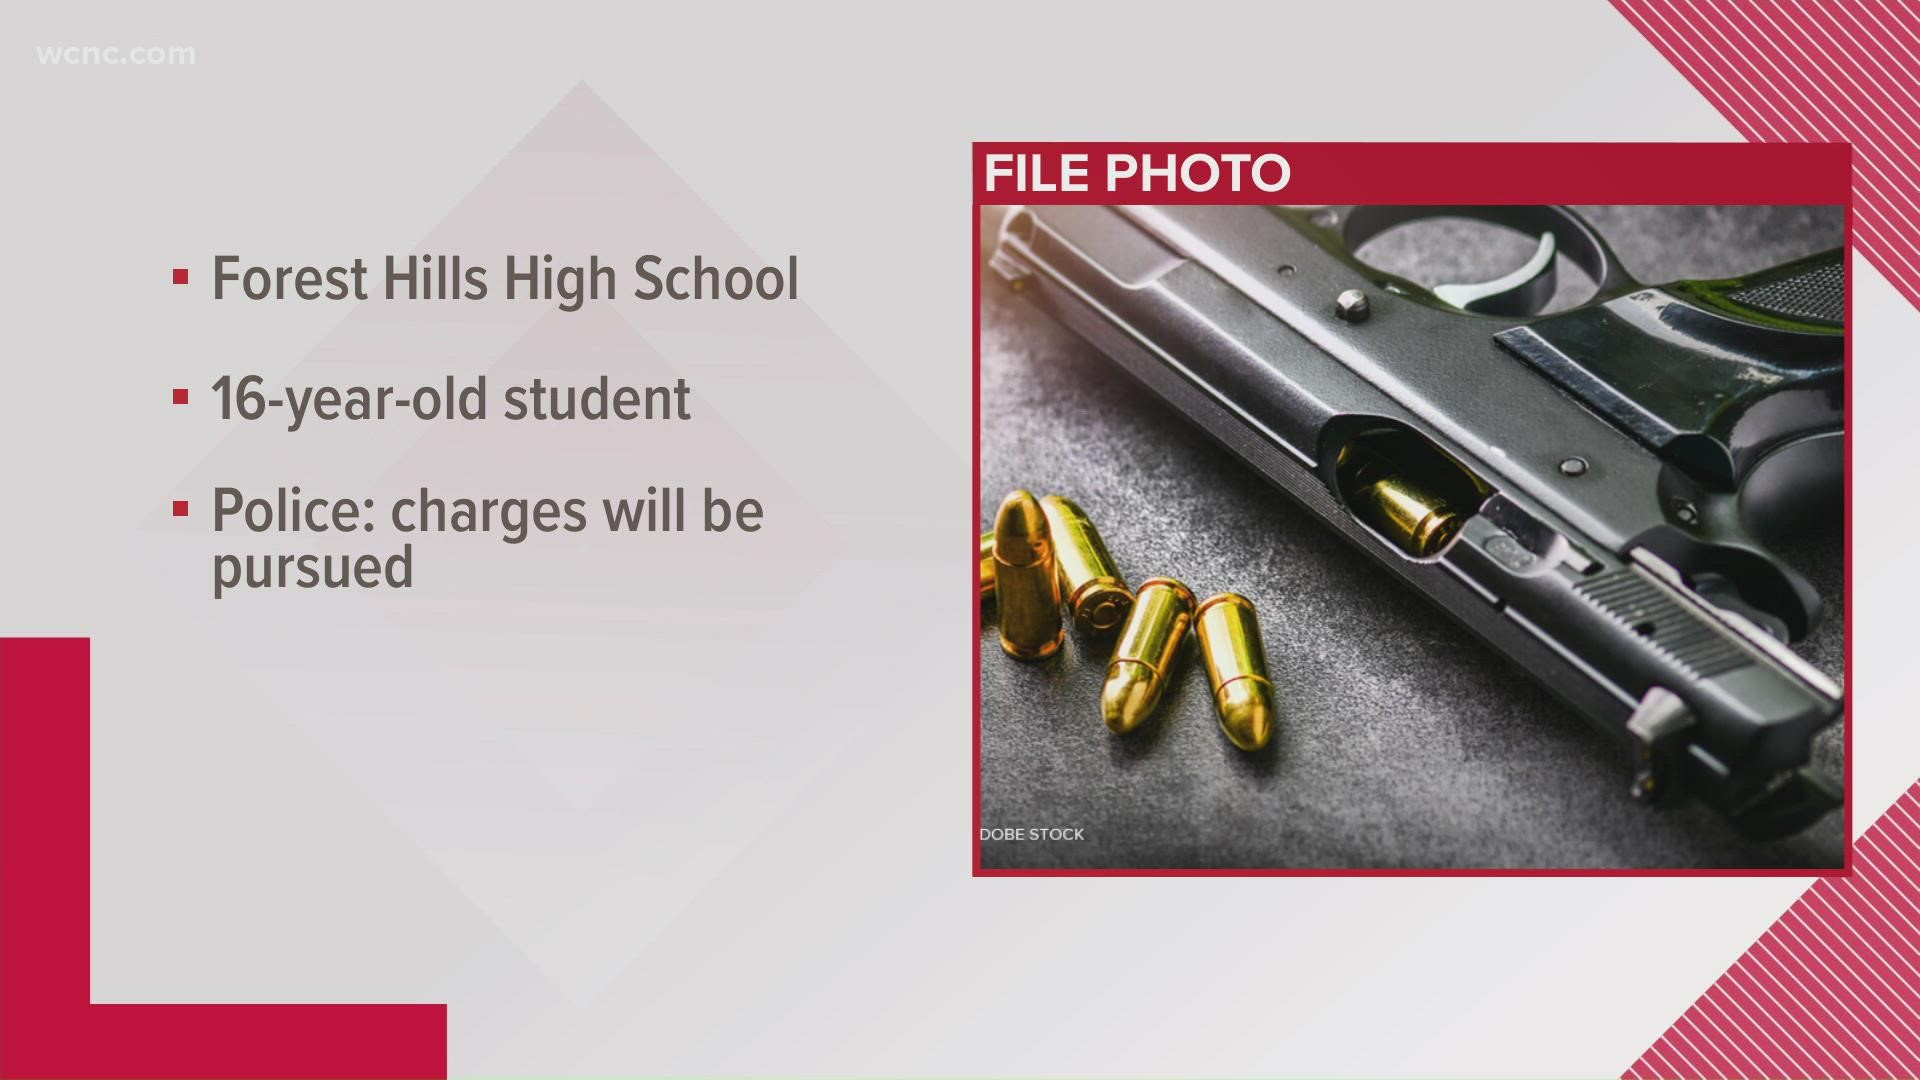 The 16-year-old student was found with the gun near the football stadium. Police said there is no evidence the teen threatened to use it.